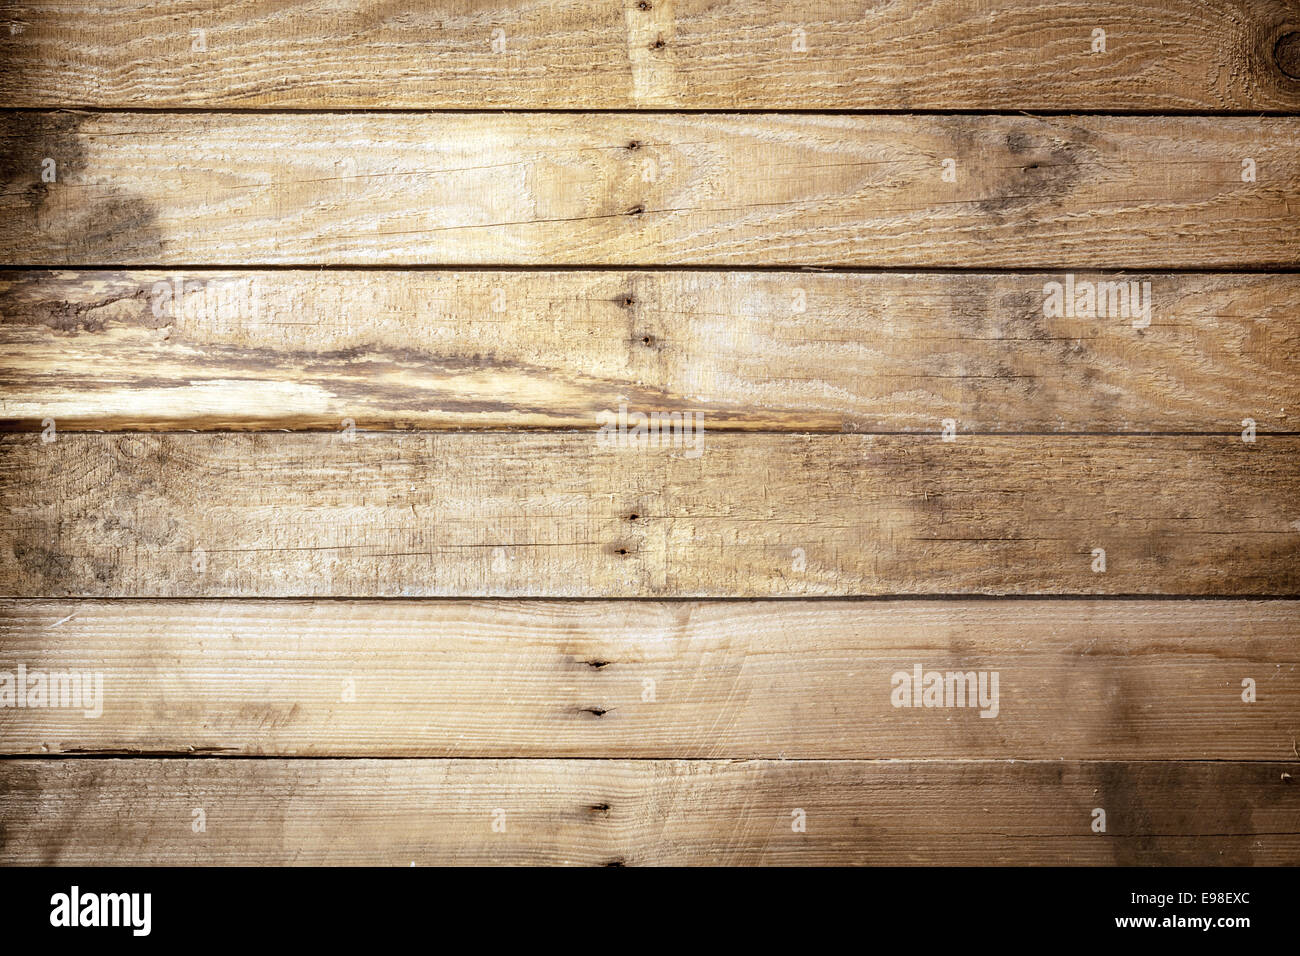 Old weathered rustic wooden background texture with vintage brown ...